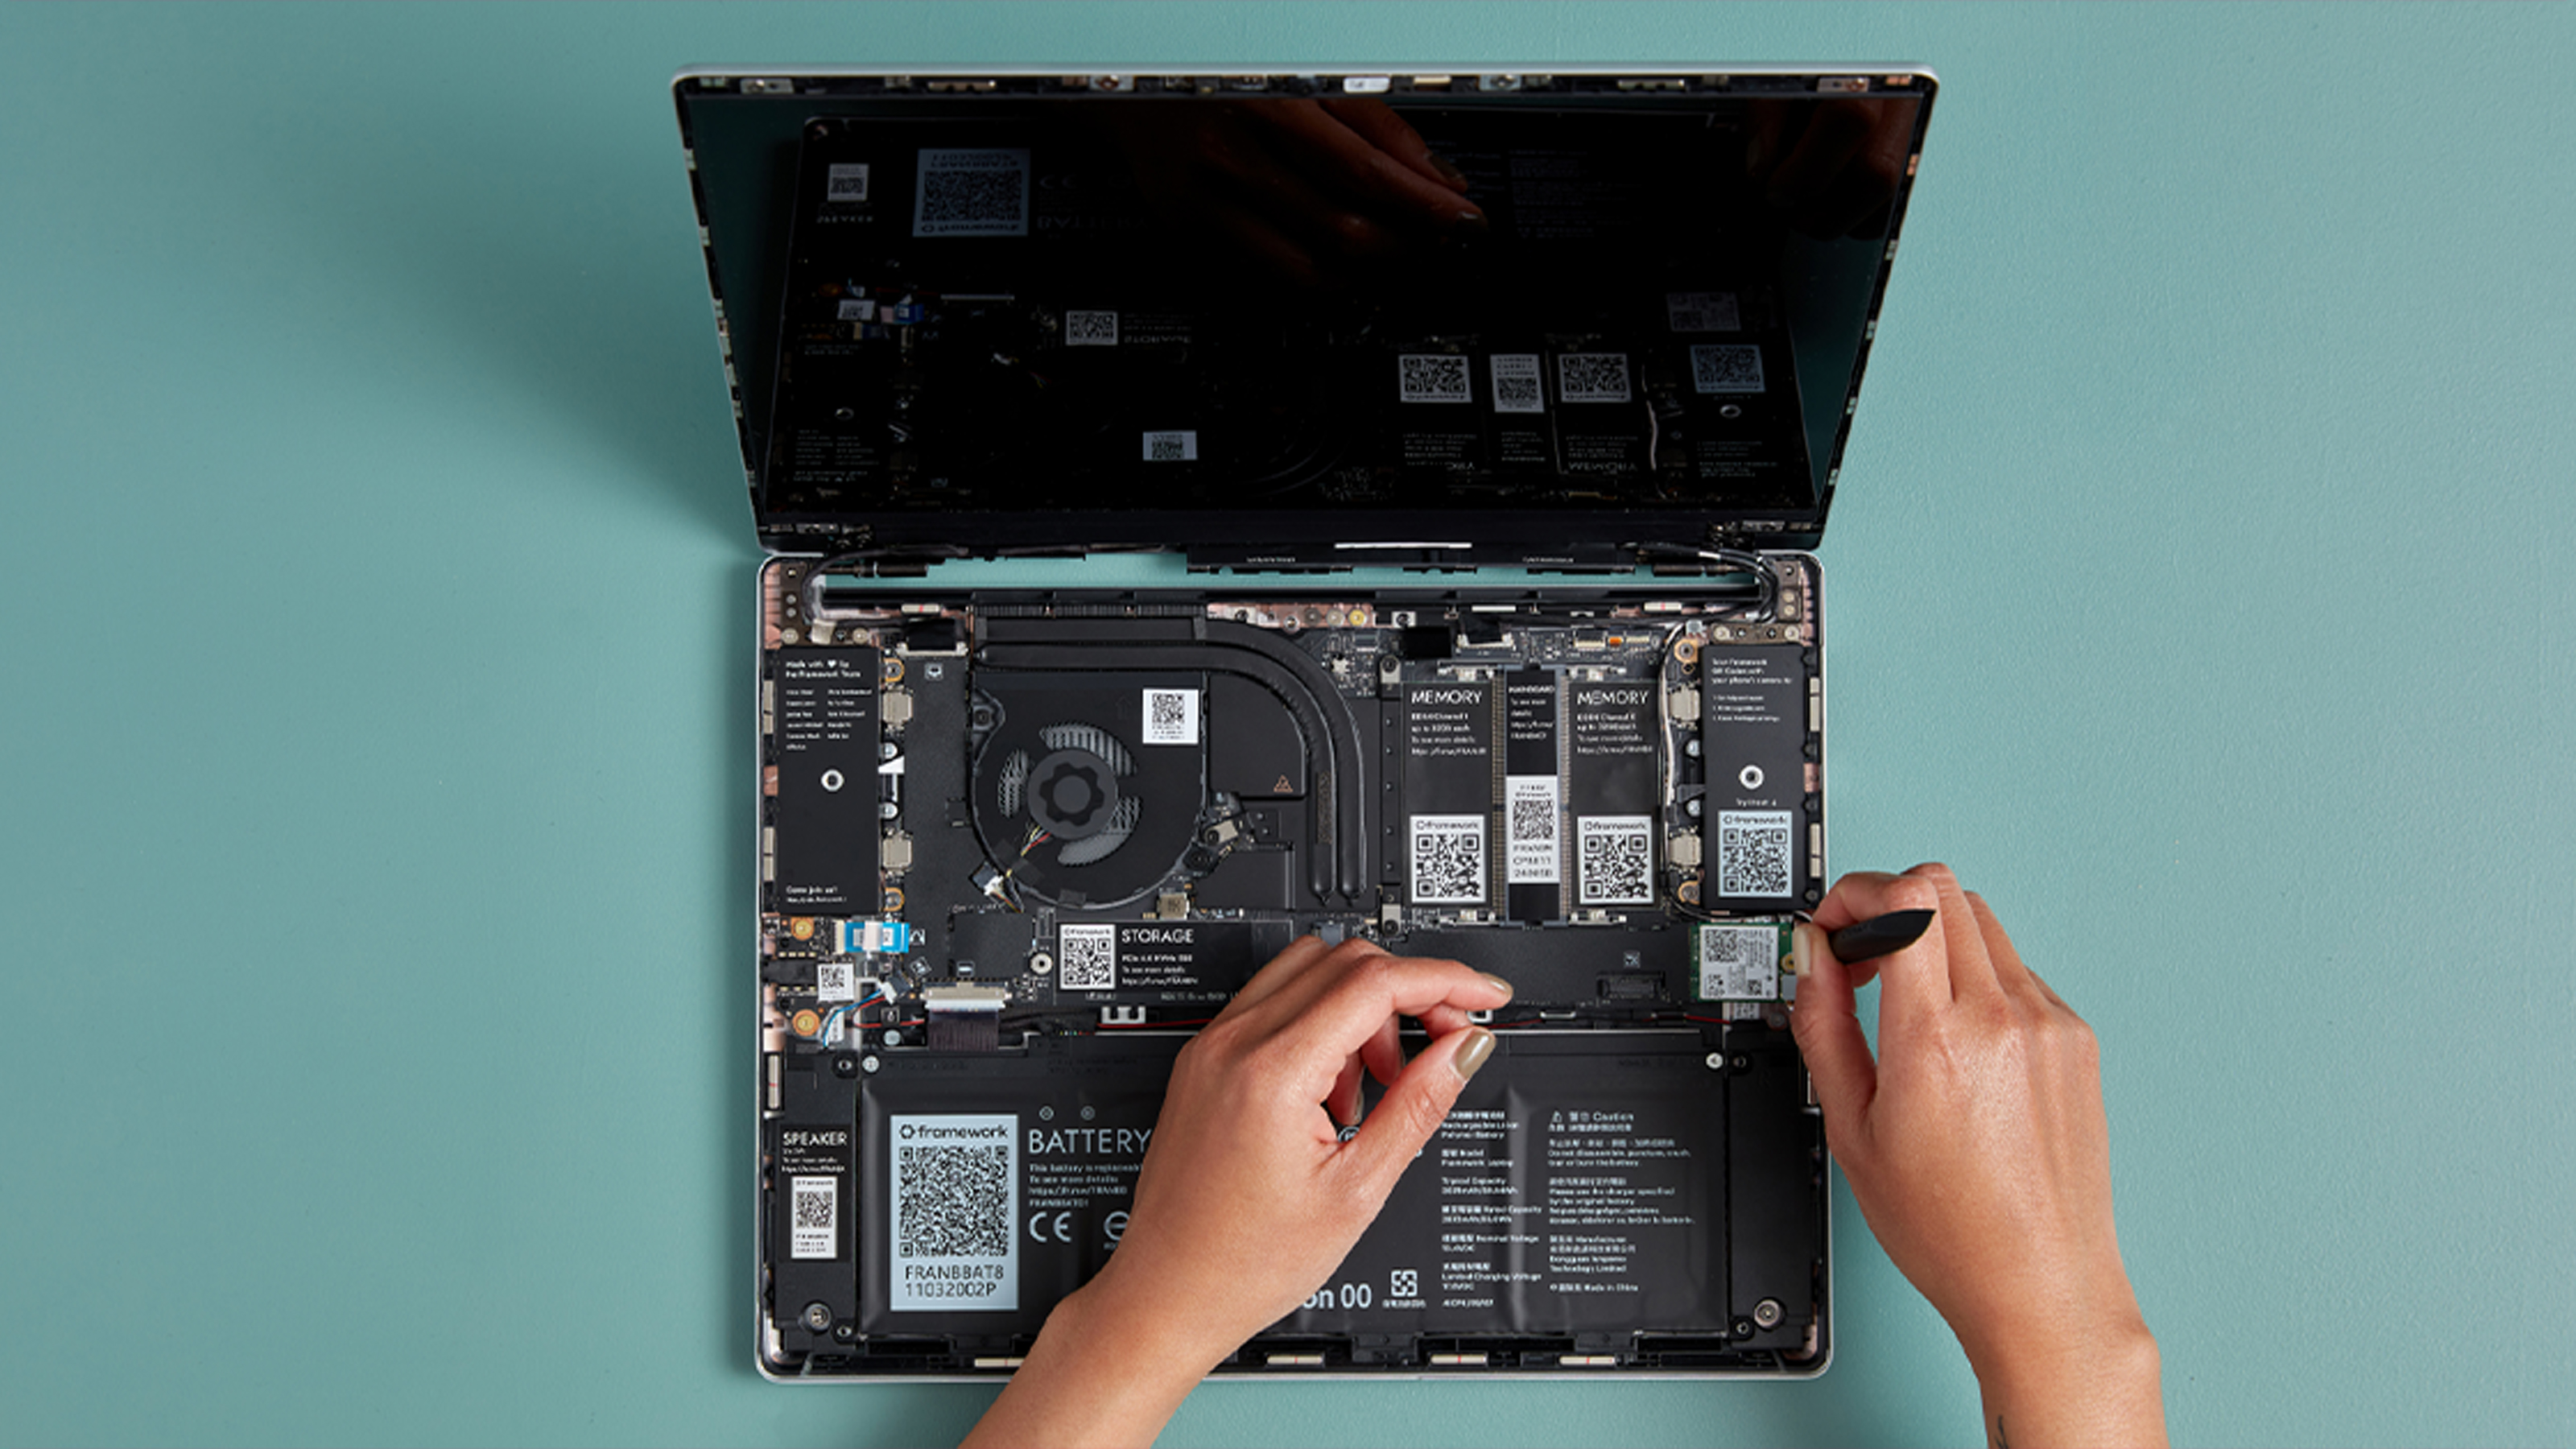 This DIY laptop is challenging tech giants like Apple & Microsoft